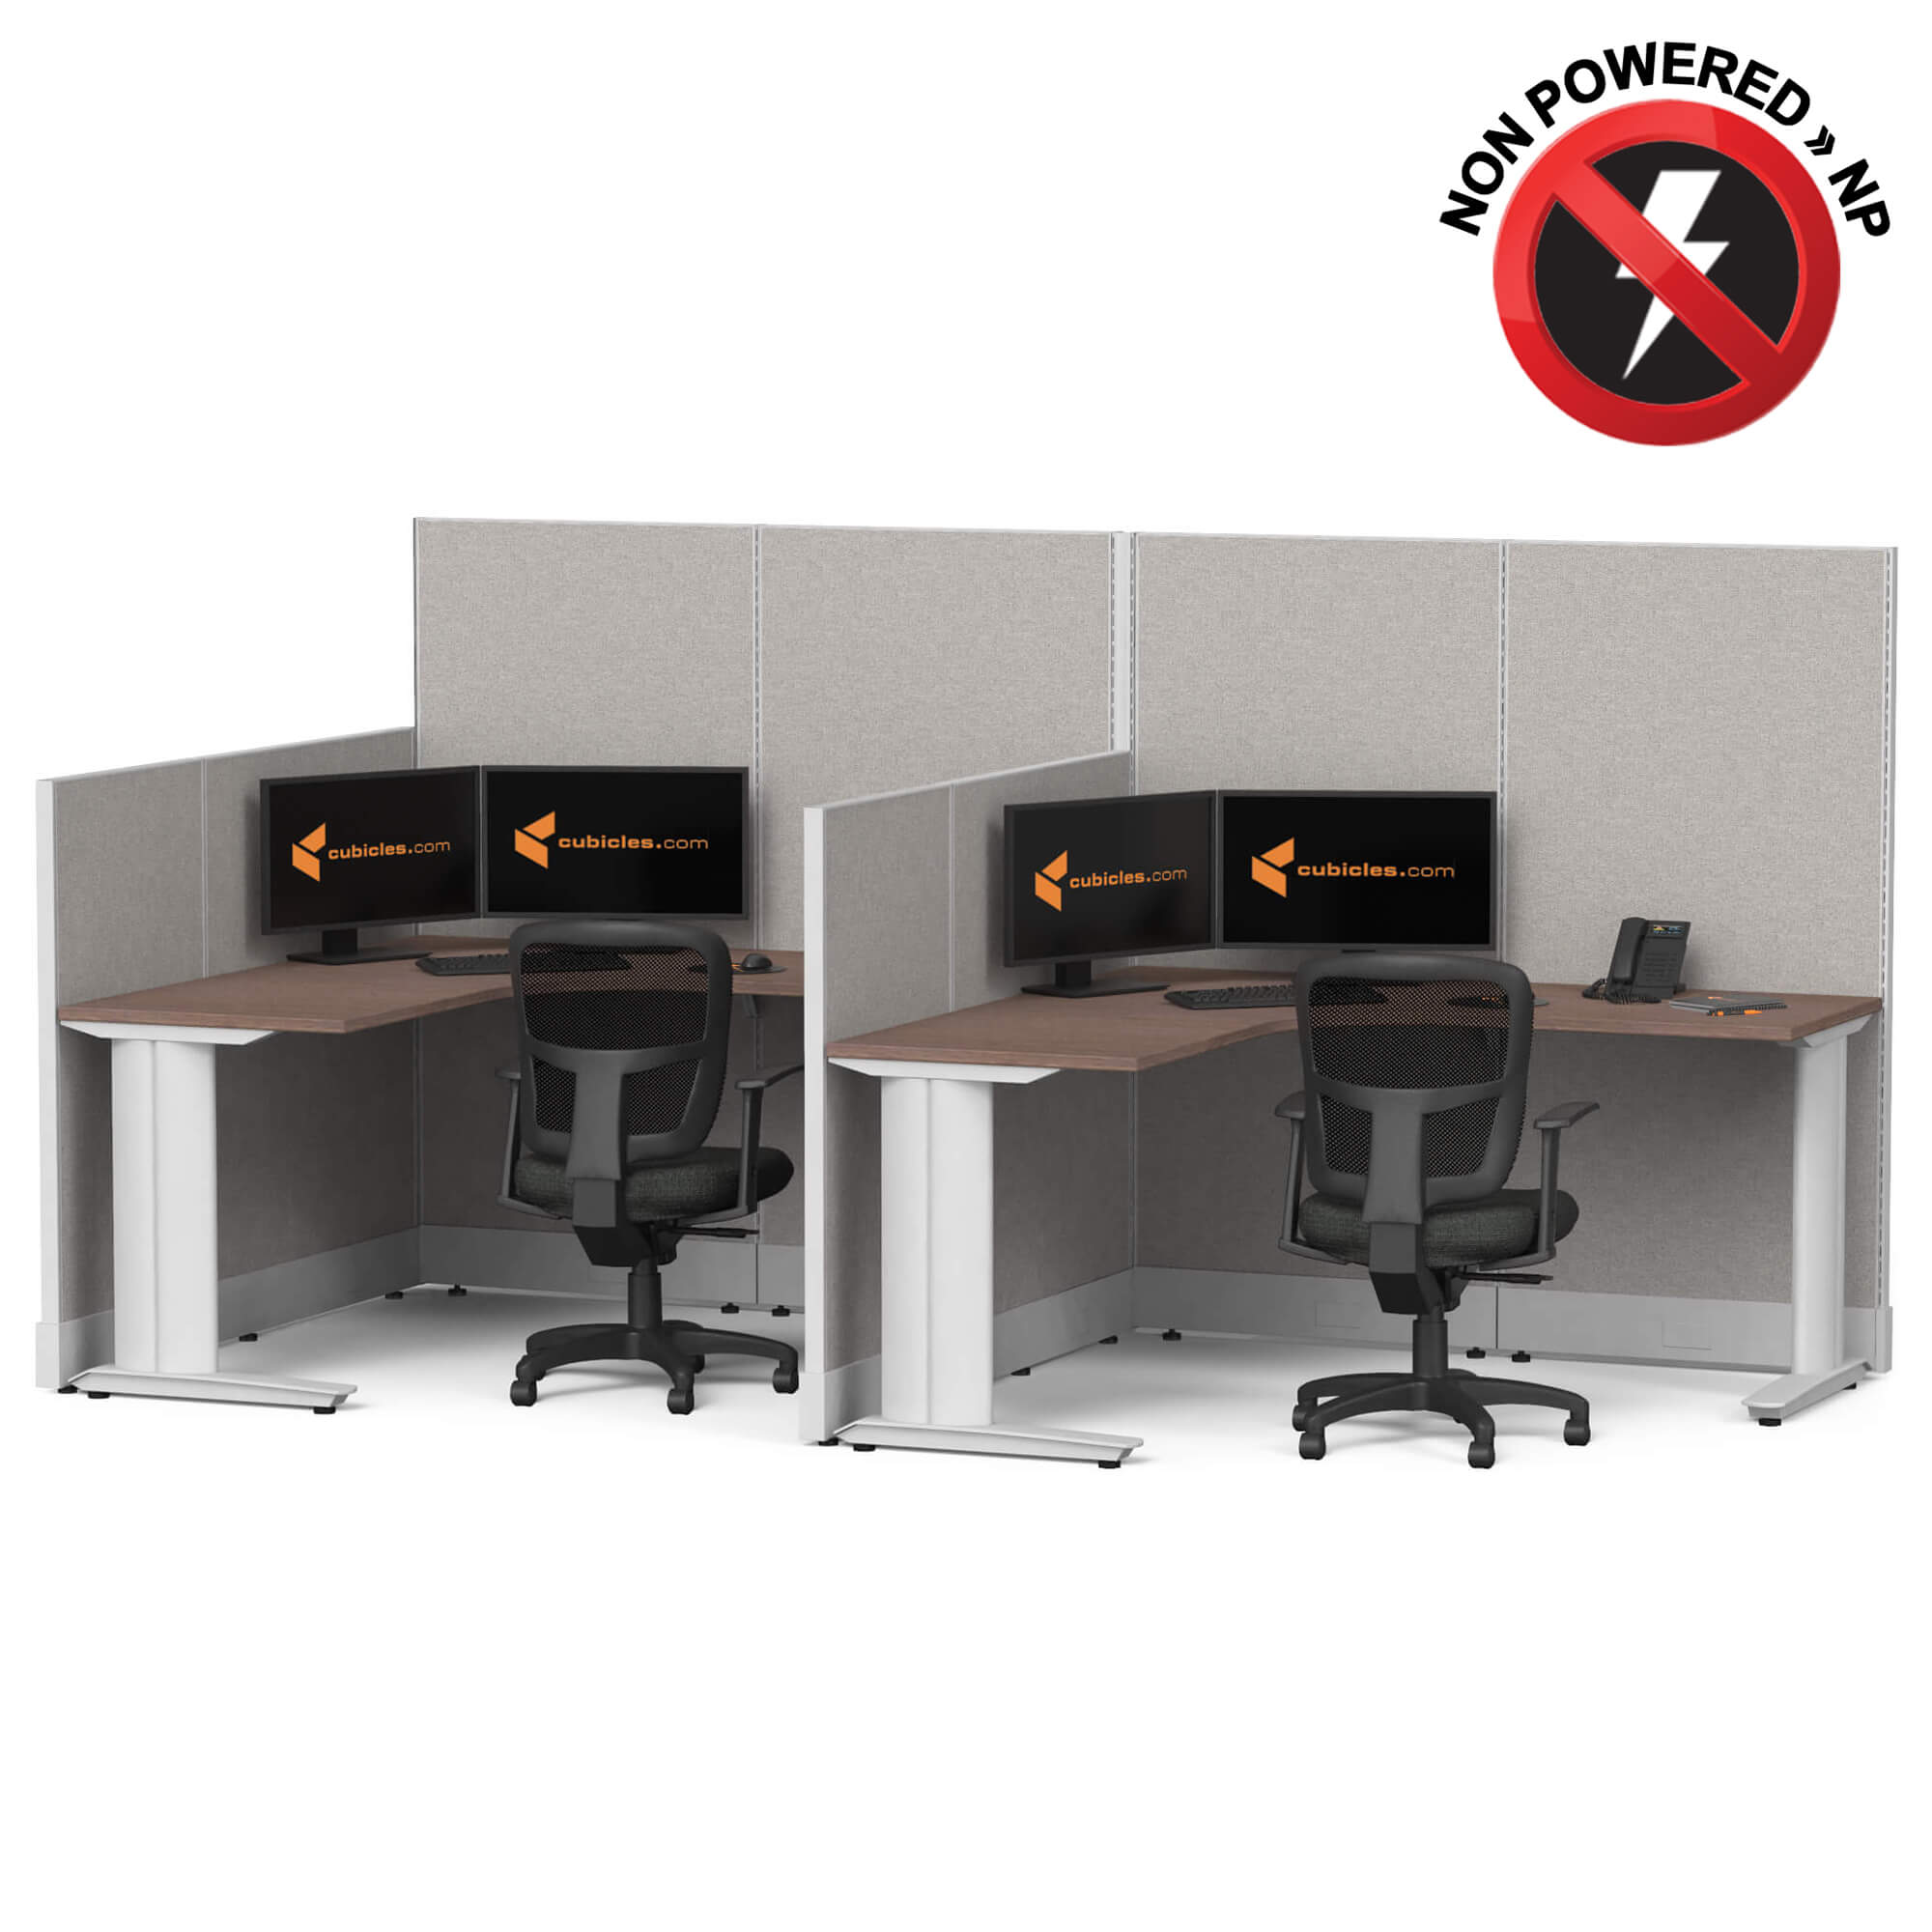 cubicle-desk-l-shaped-workstation-2pack-inline-non-powered-sign.jpg